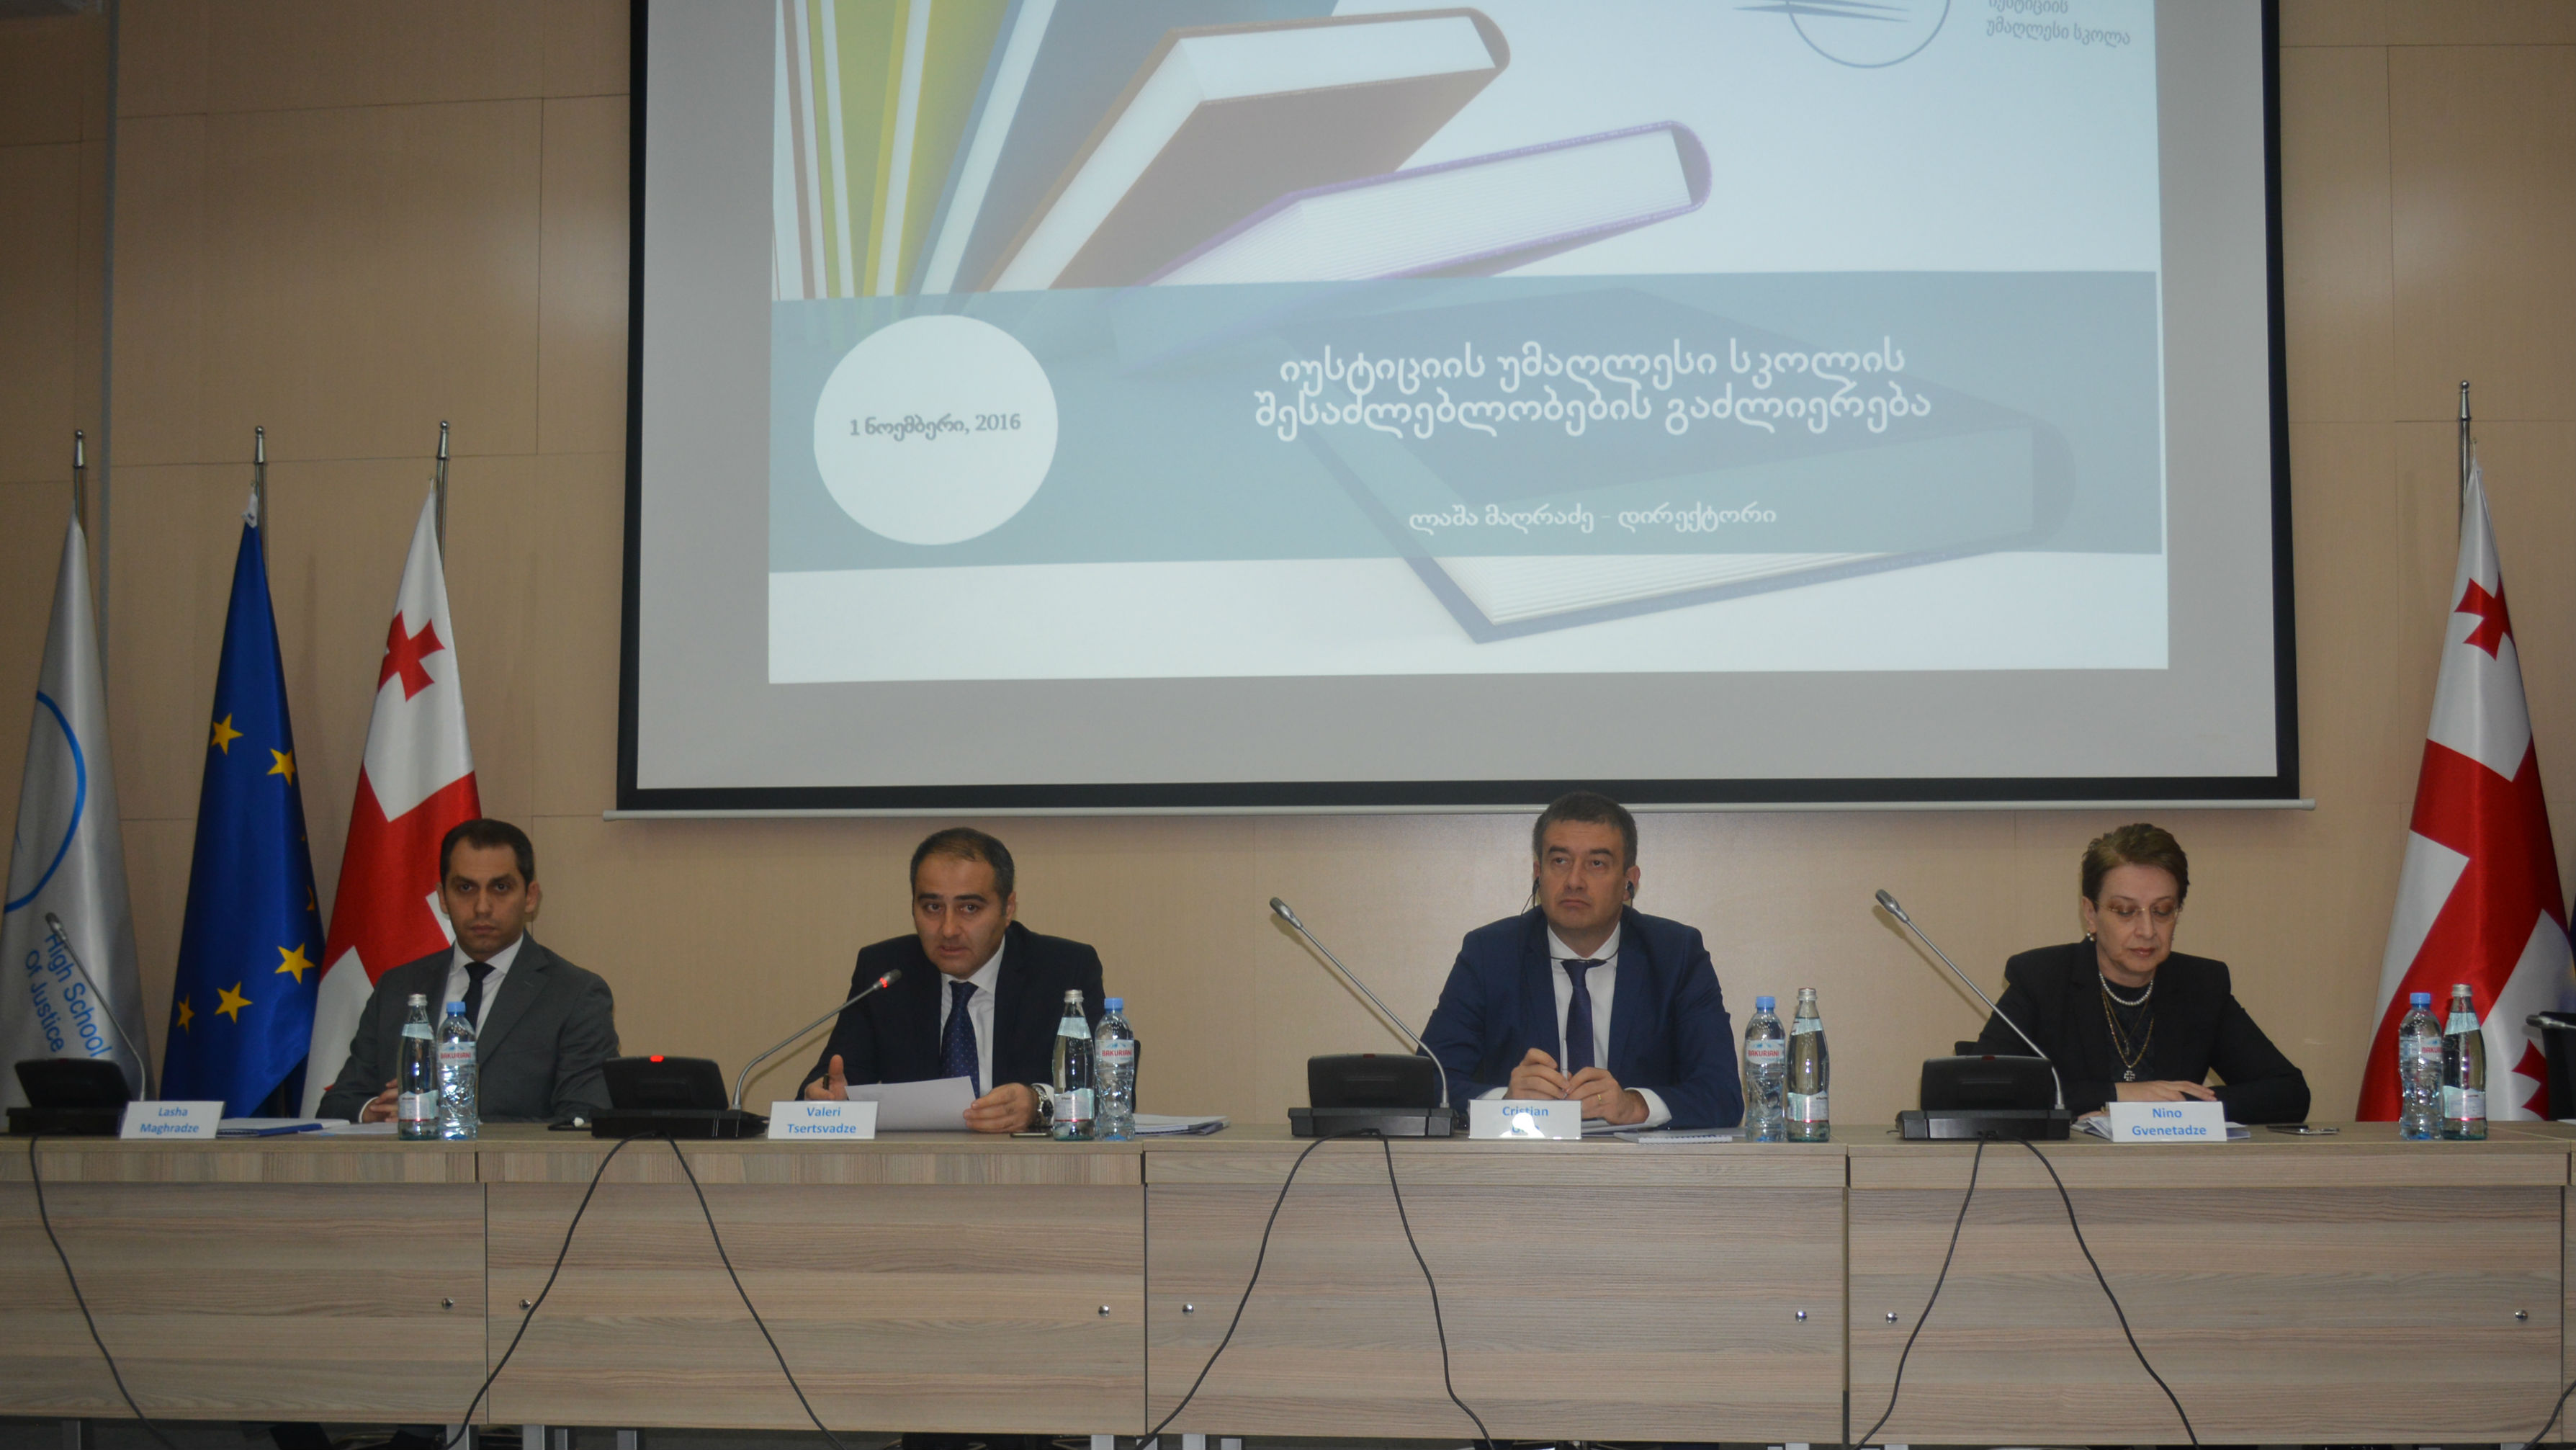 A new project on Strengthening the Capacity of the High School of Justice of Georgia was launched